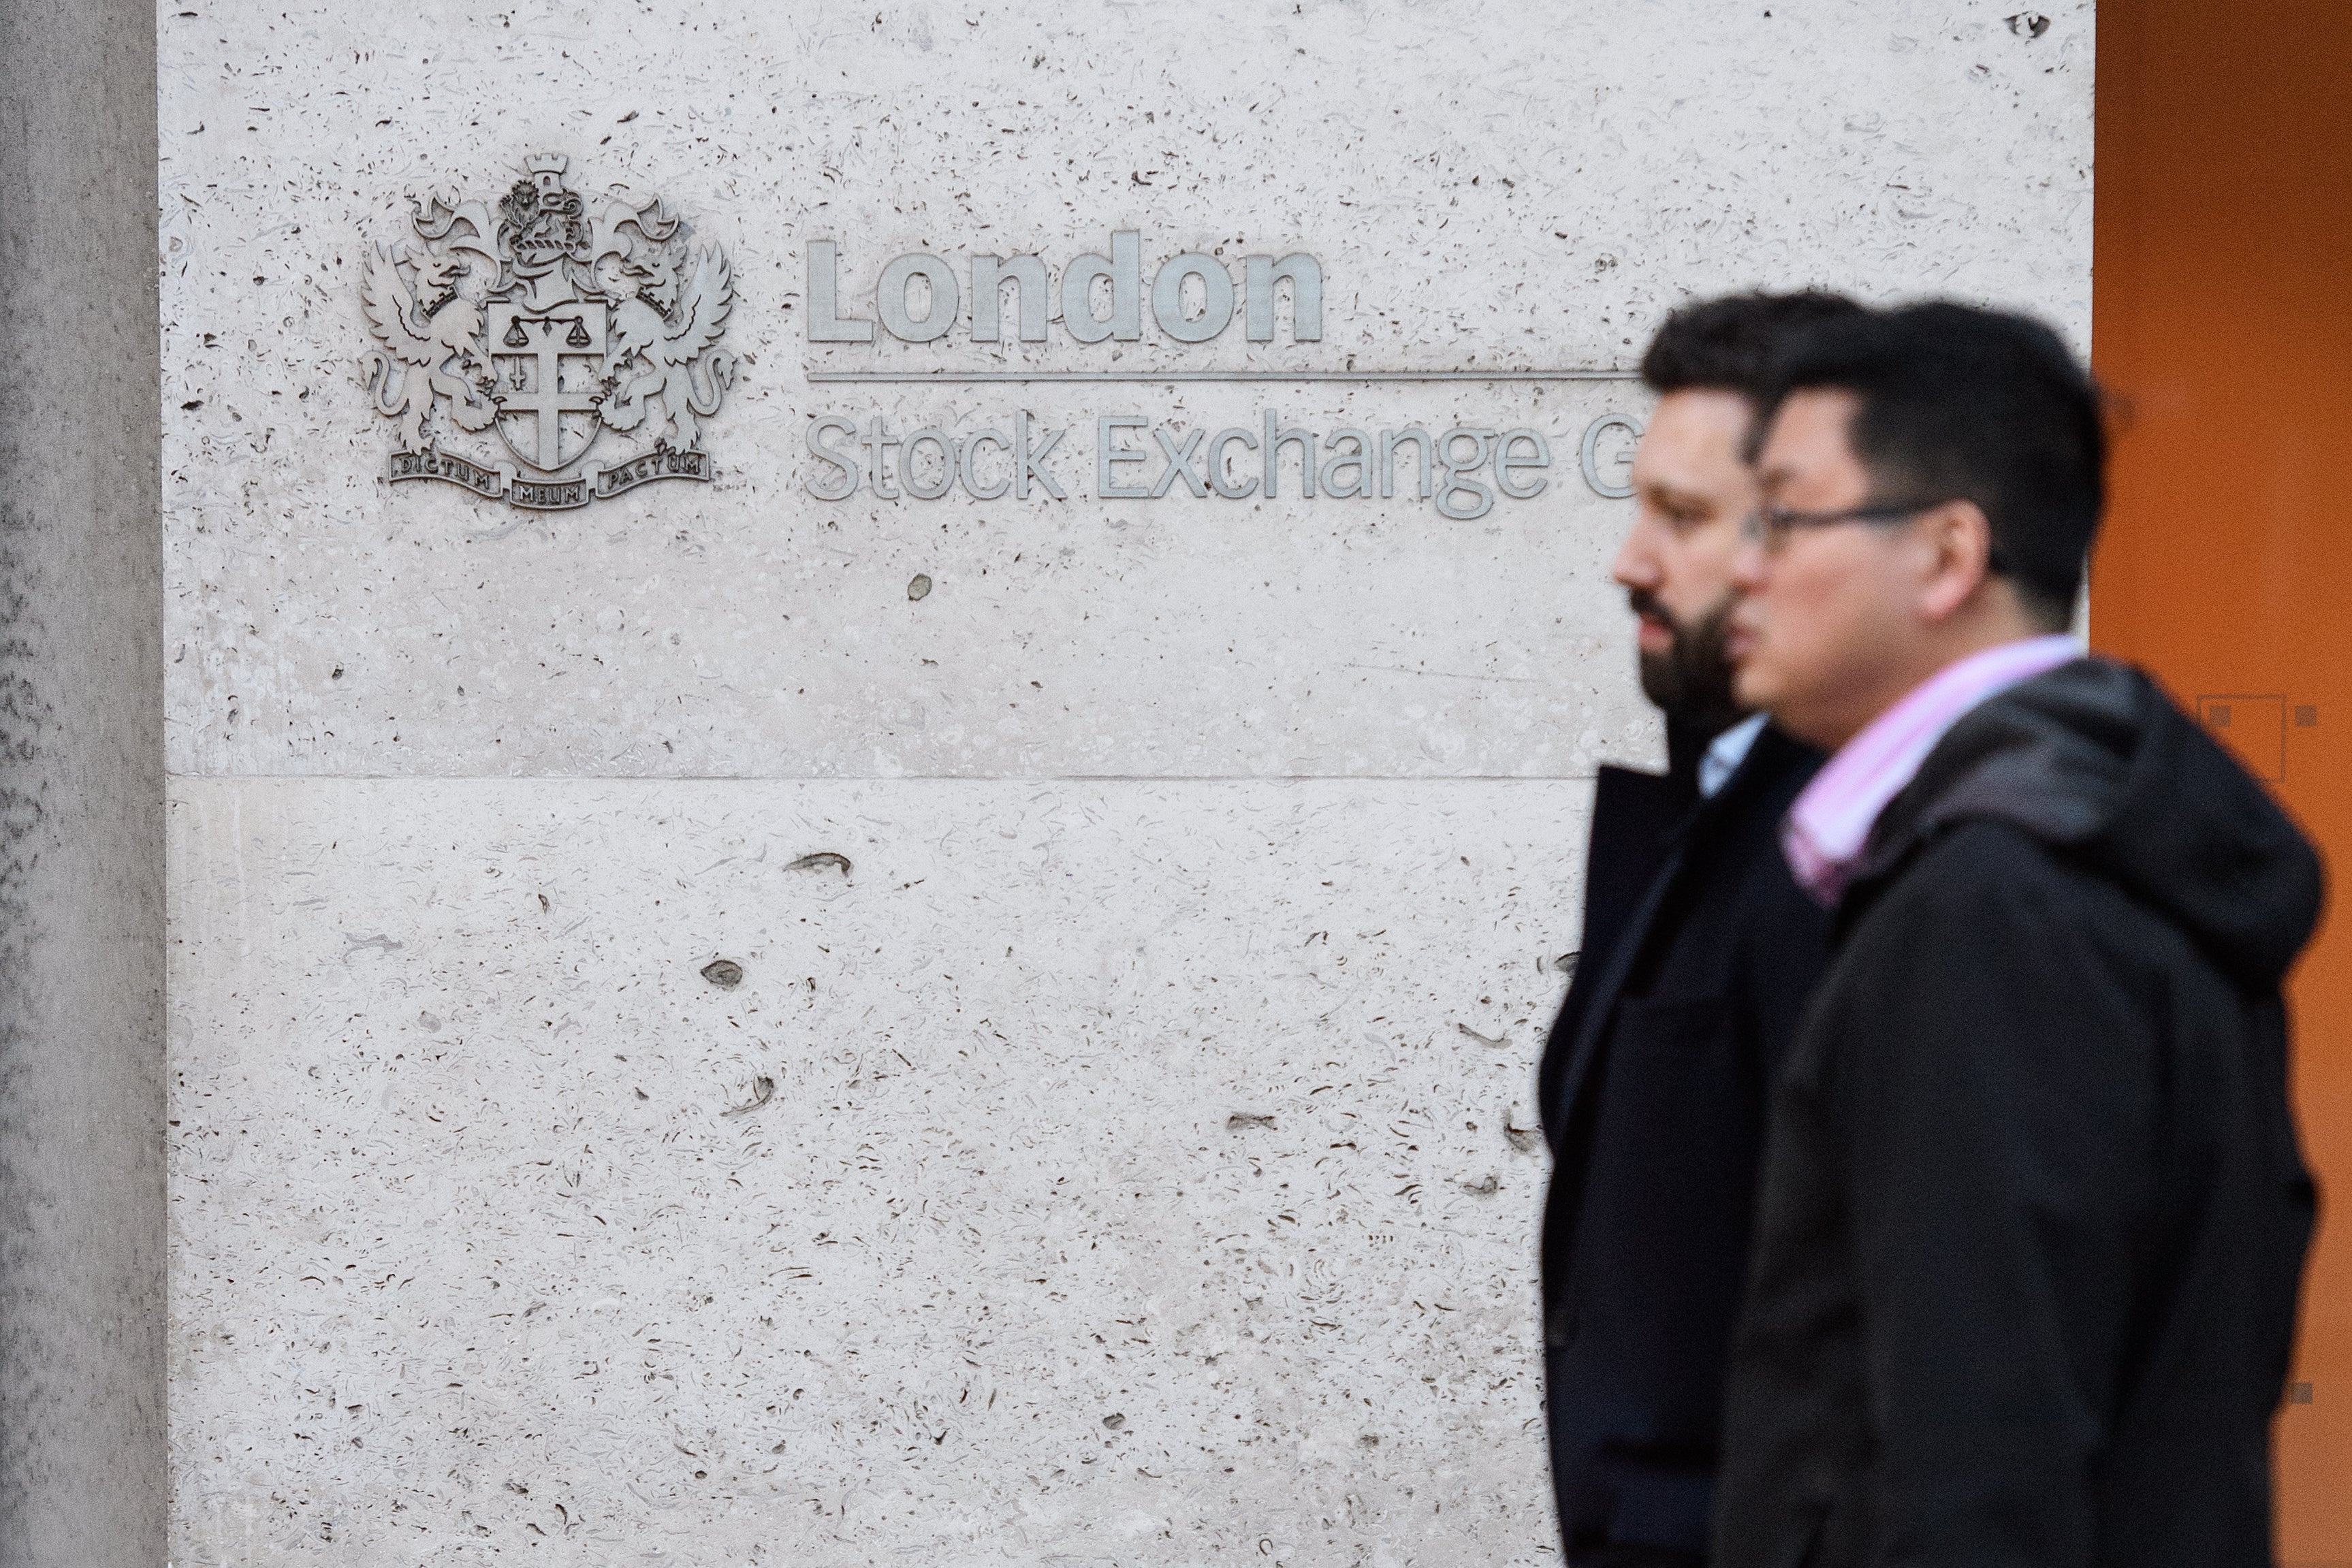 ‘Rolet was a top banker before he took on the job of running the London Stock Exchange’